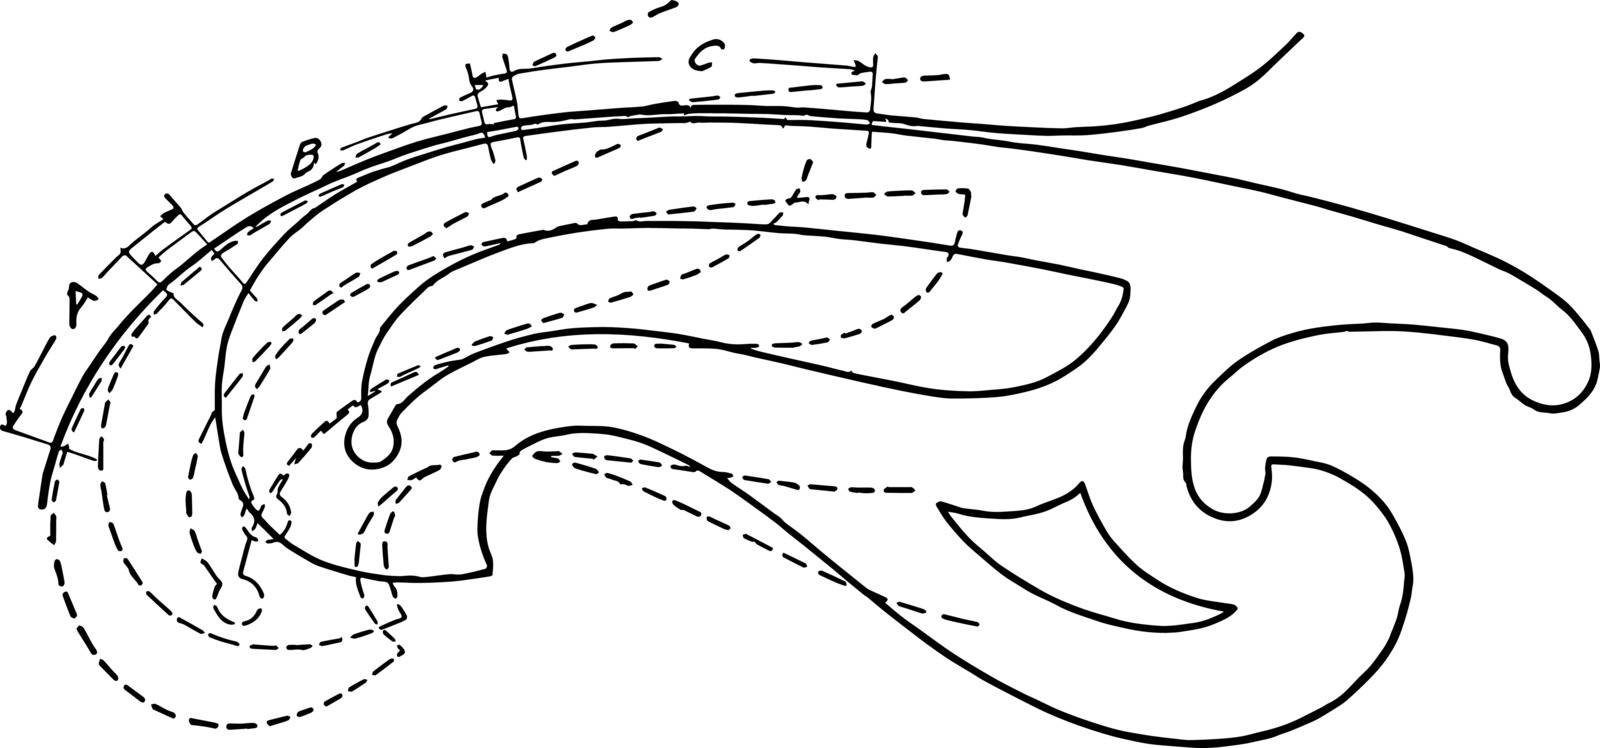 Using French Curve by connecting sufficient points to sketch a curve is used to draw a smooth line through predetermined points vintage line drawing or engraving illustration.